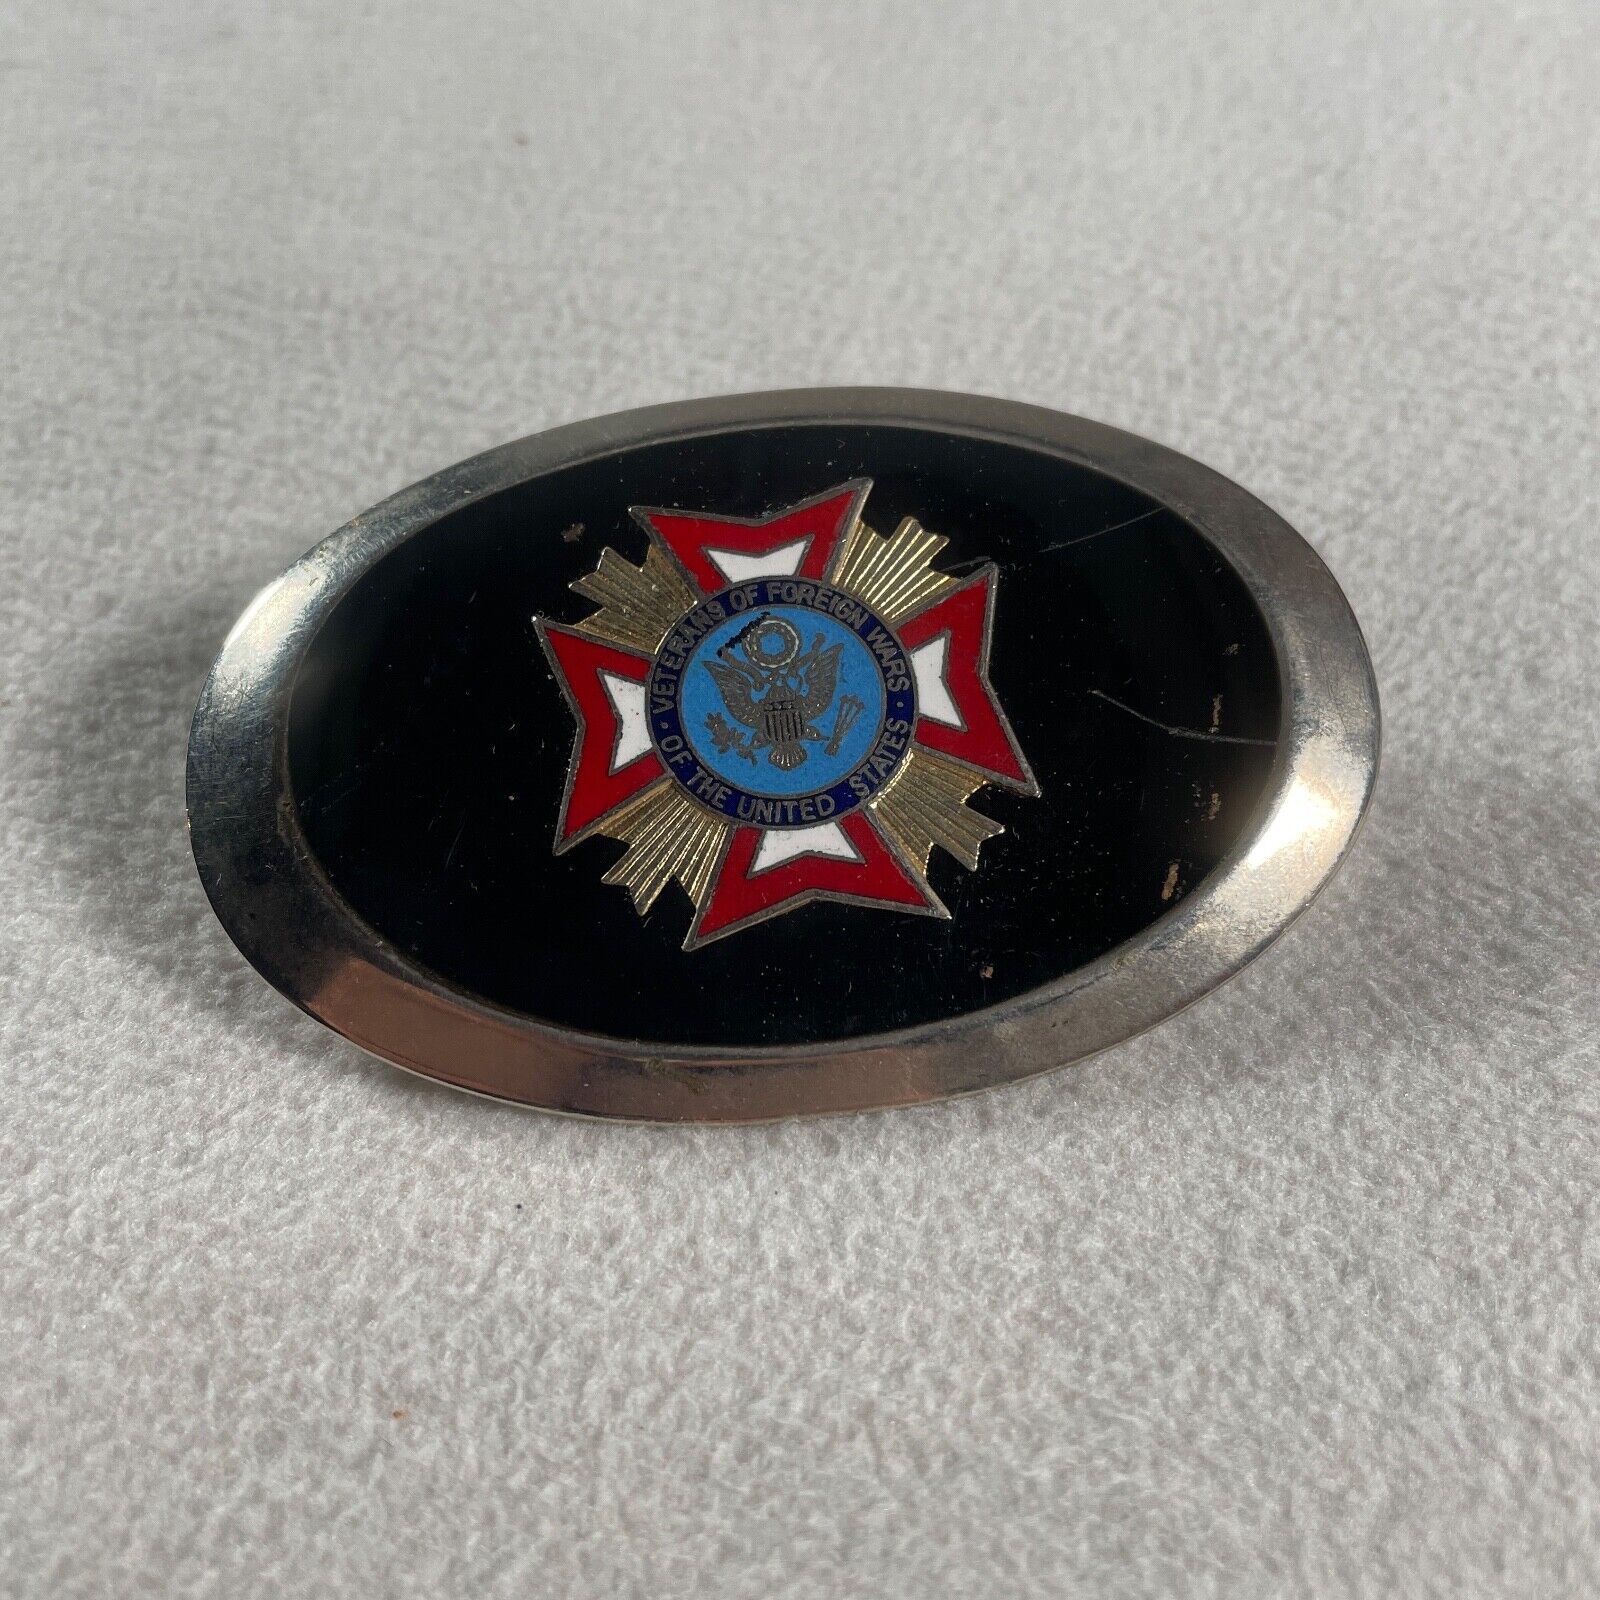 Vintage VFW Veterans of Foreign Wars Insignia Belt Buckle United States USA Rare